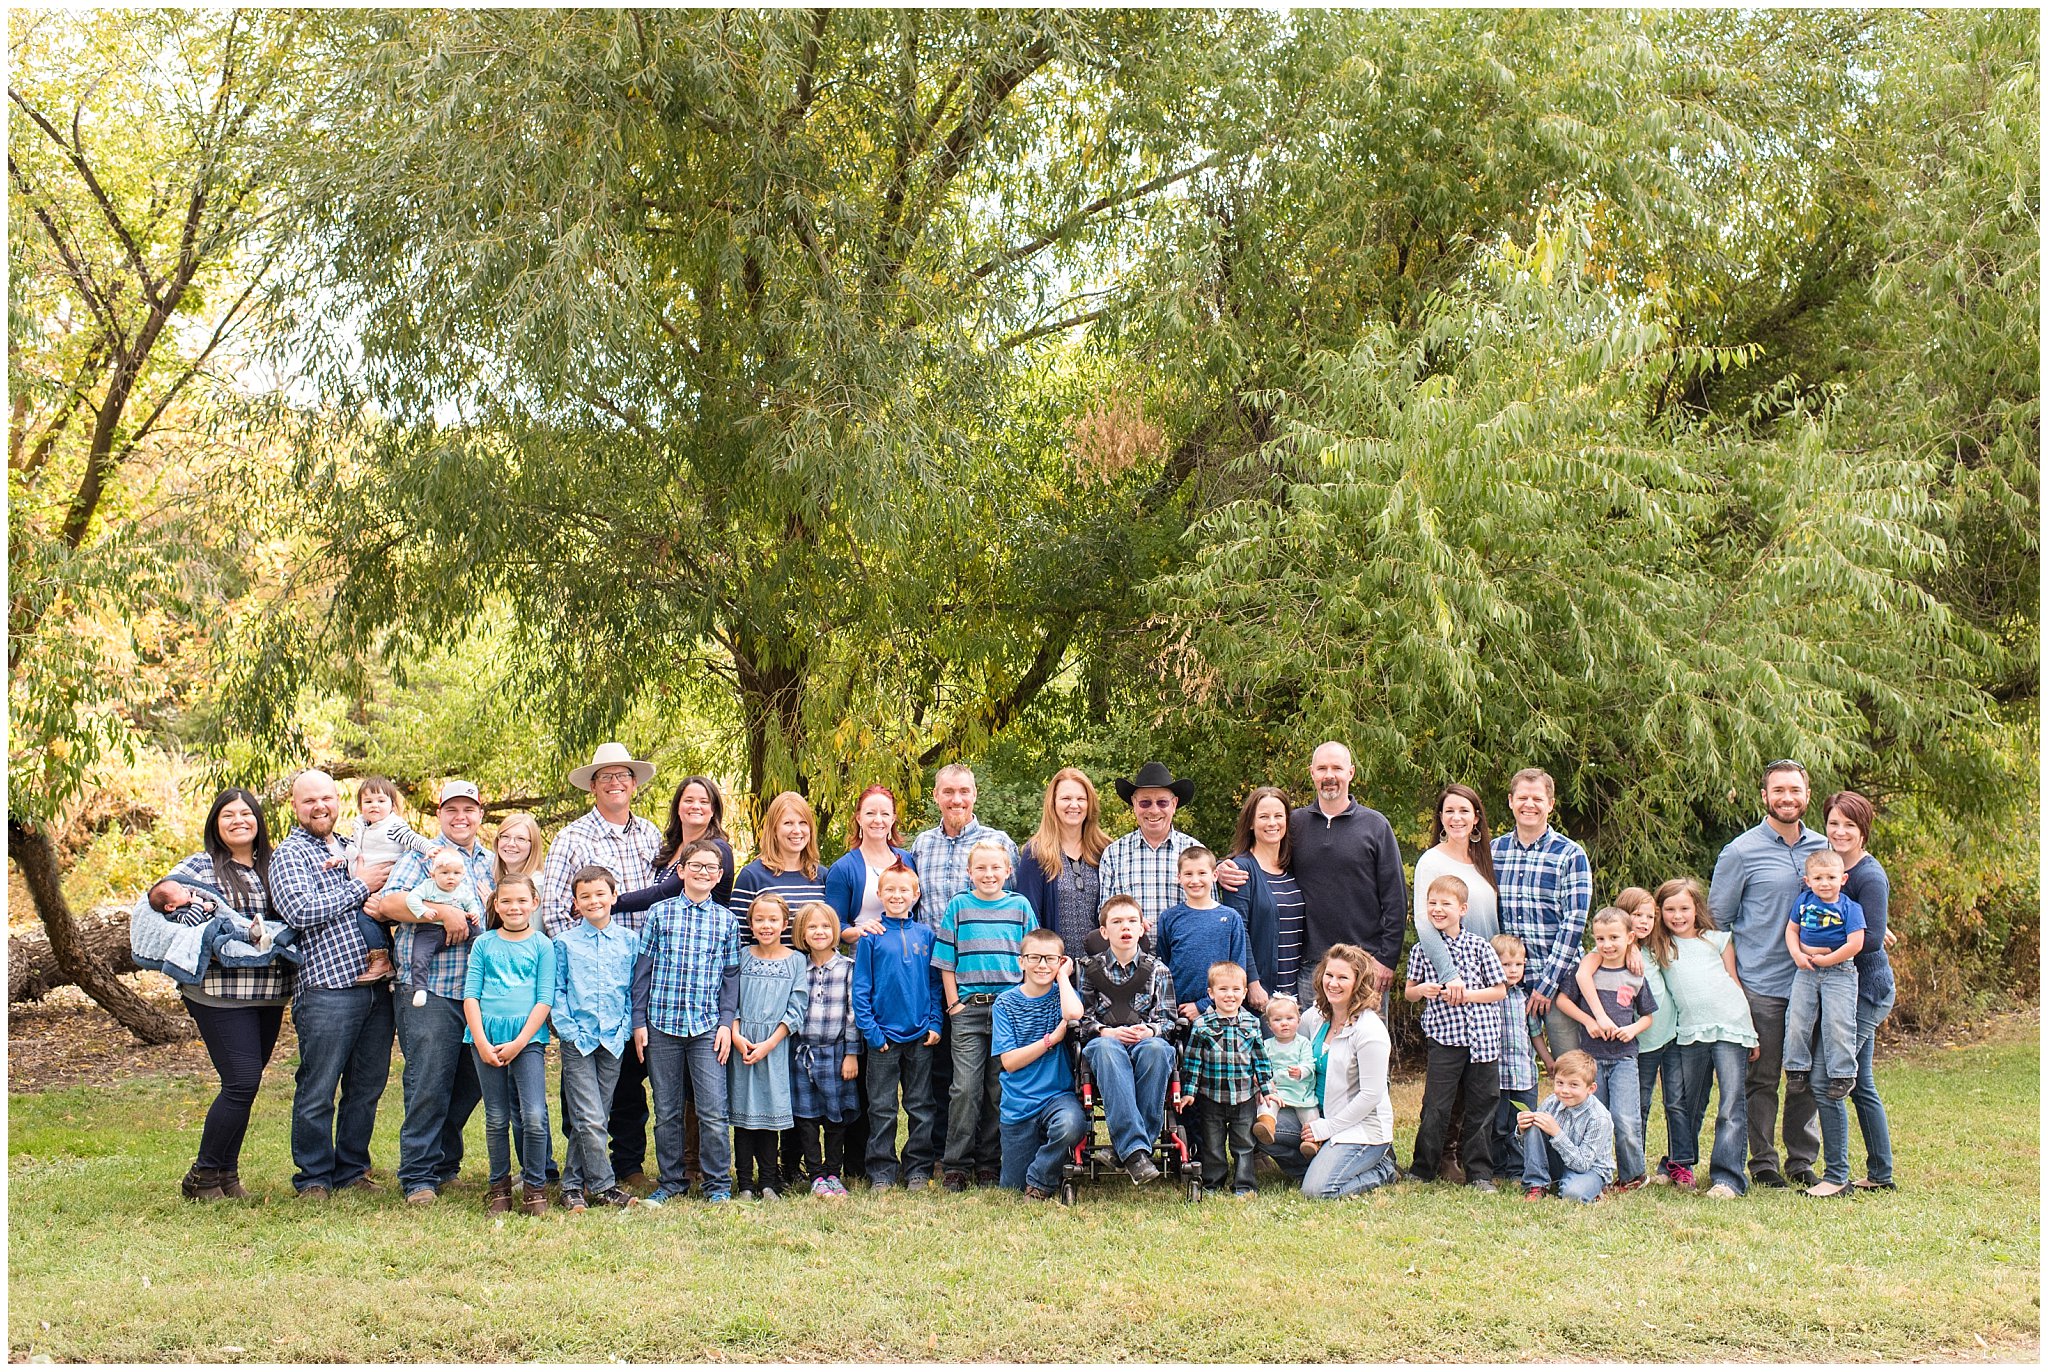 Extended Family picture in the fall trees | Tremonton Family Pictures and Make a Wish Event | Jessie and Dallin Photography